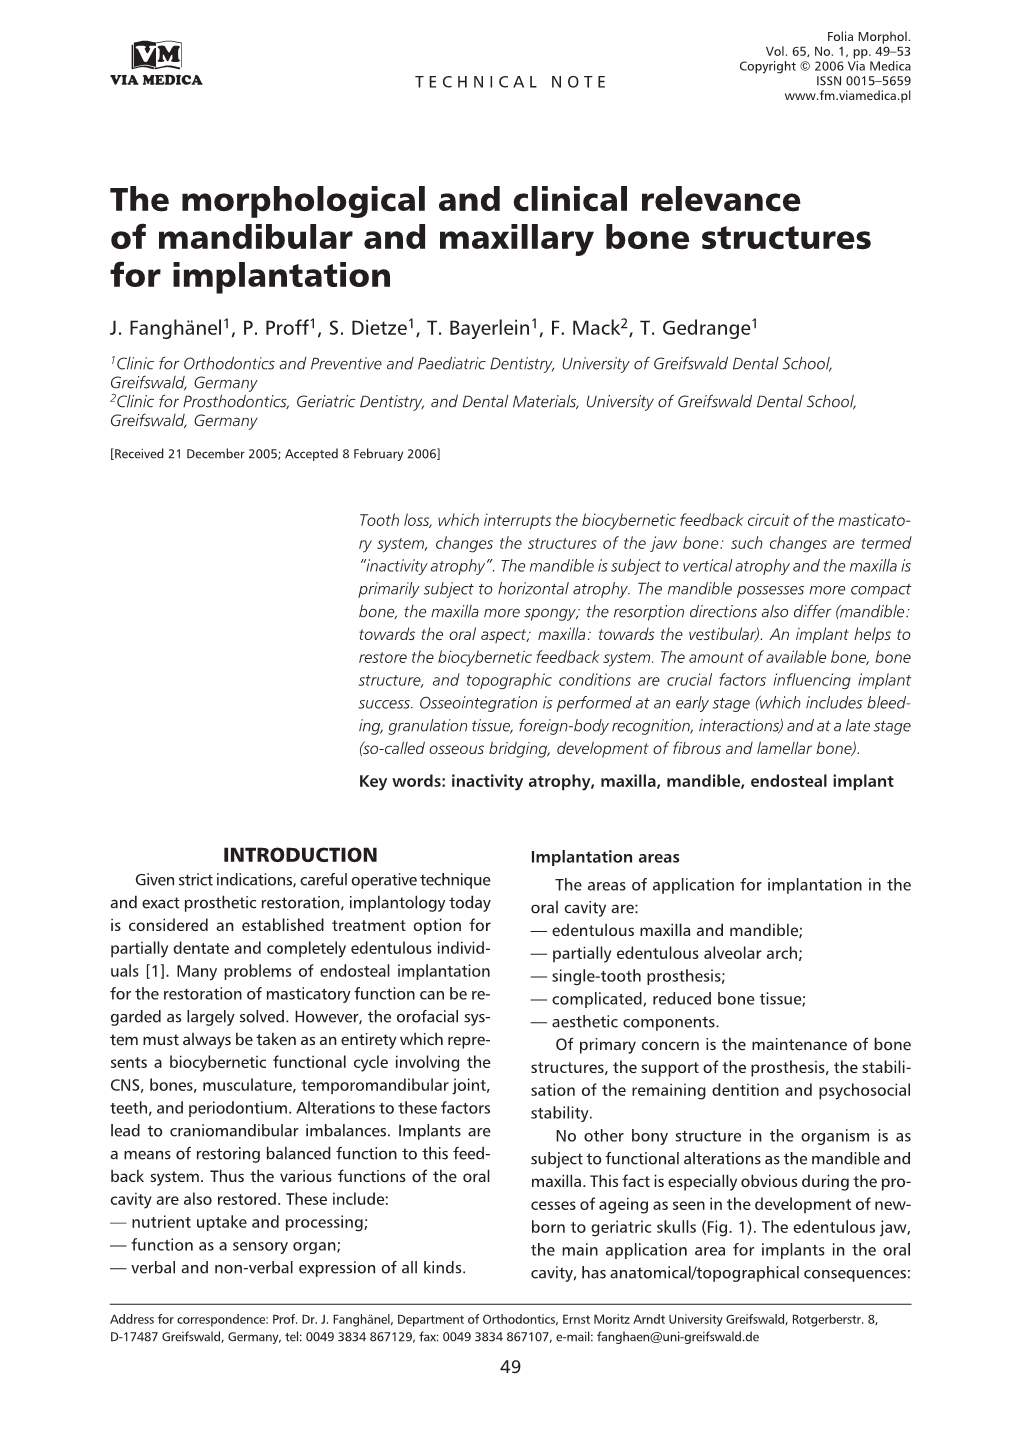 The Morphological and Clinical Relevance of Mandibular and Maxillary Bone Structures for Implantation